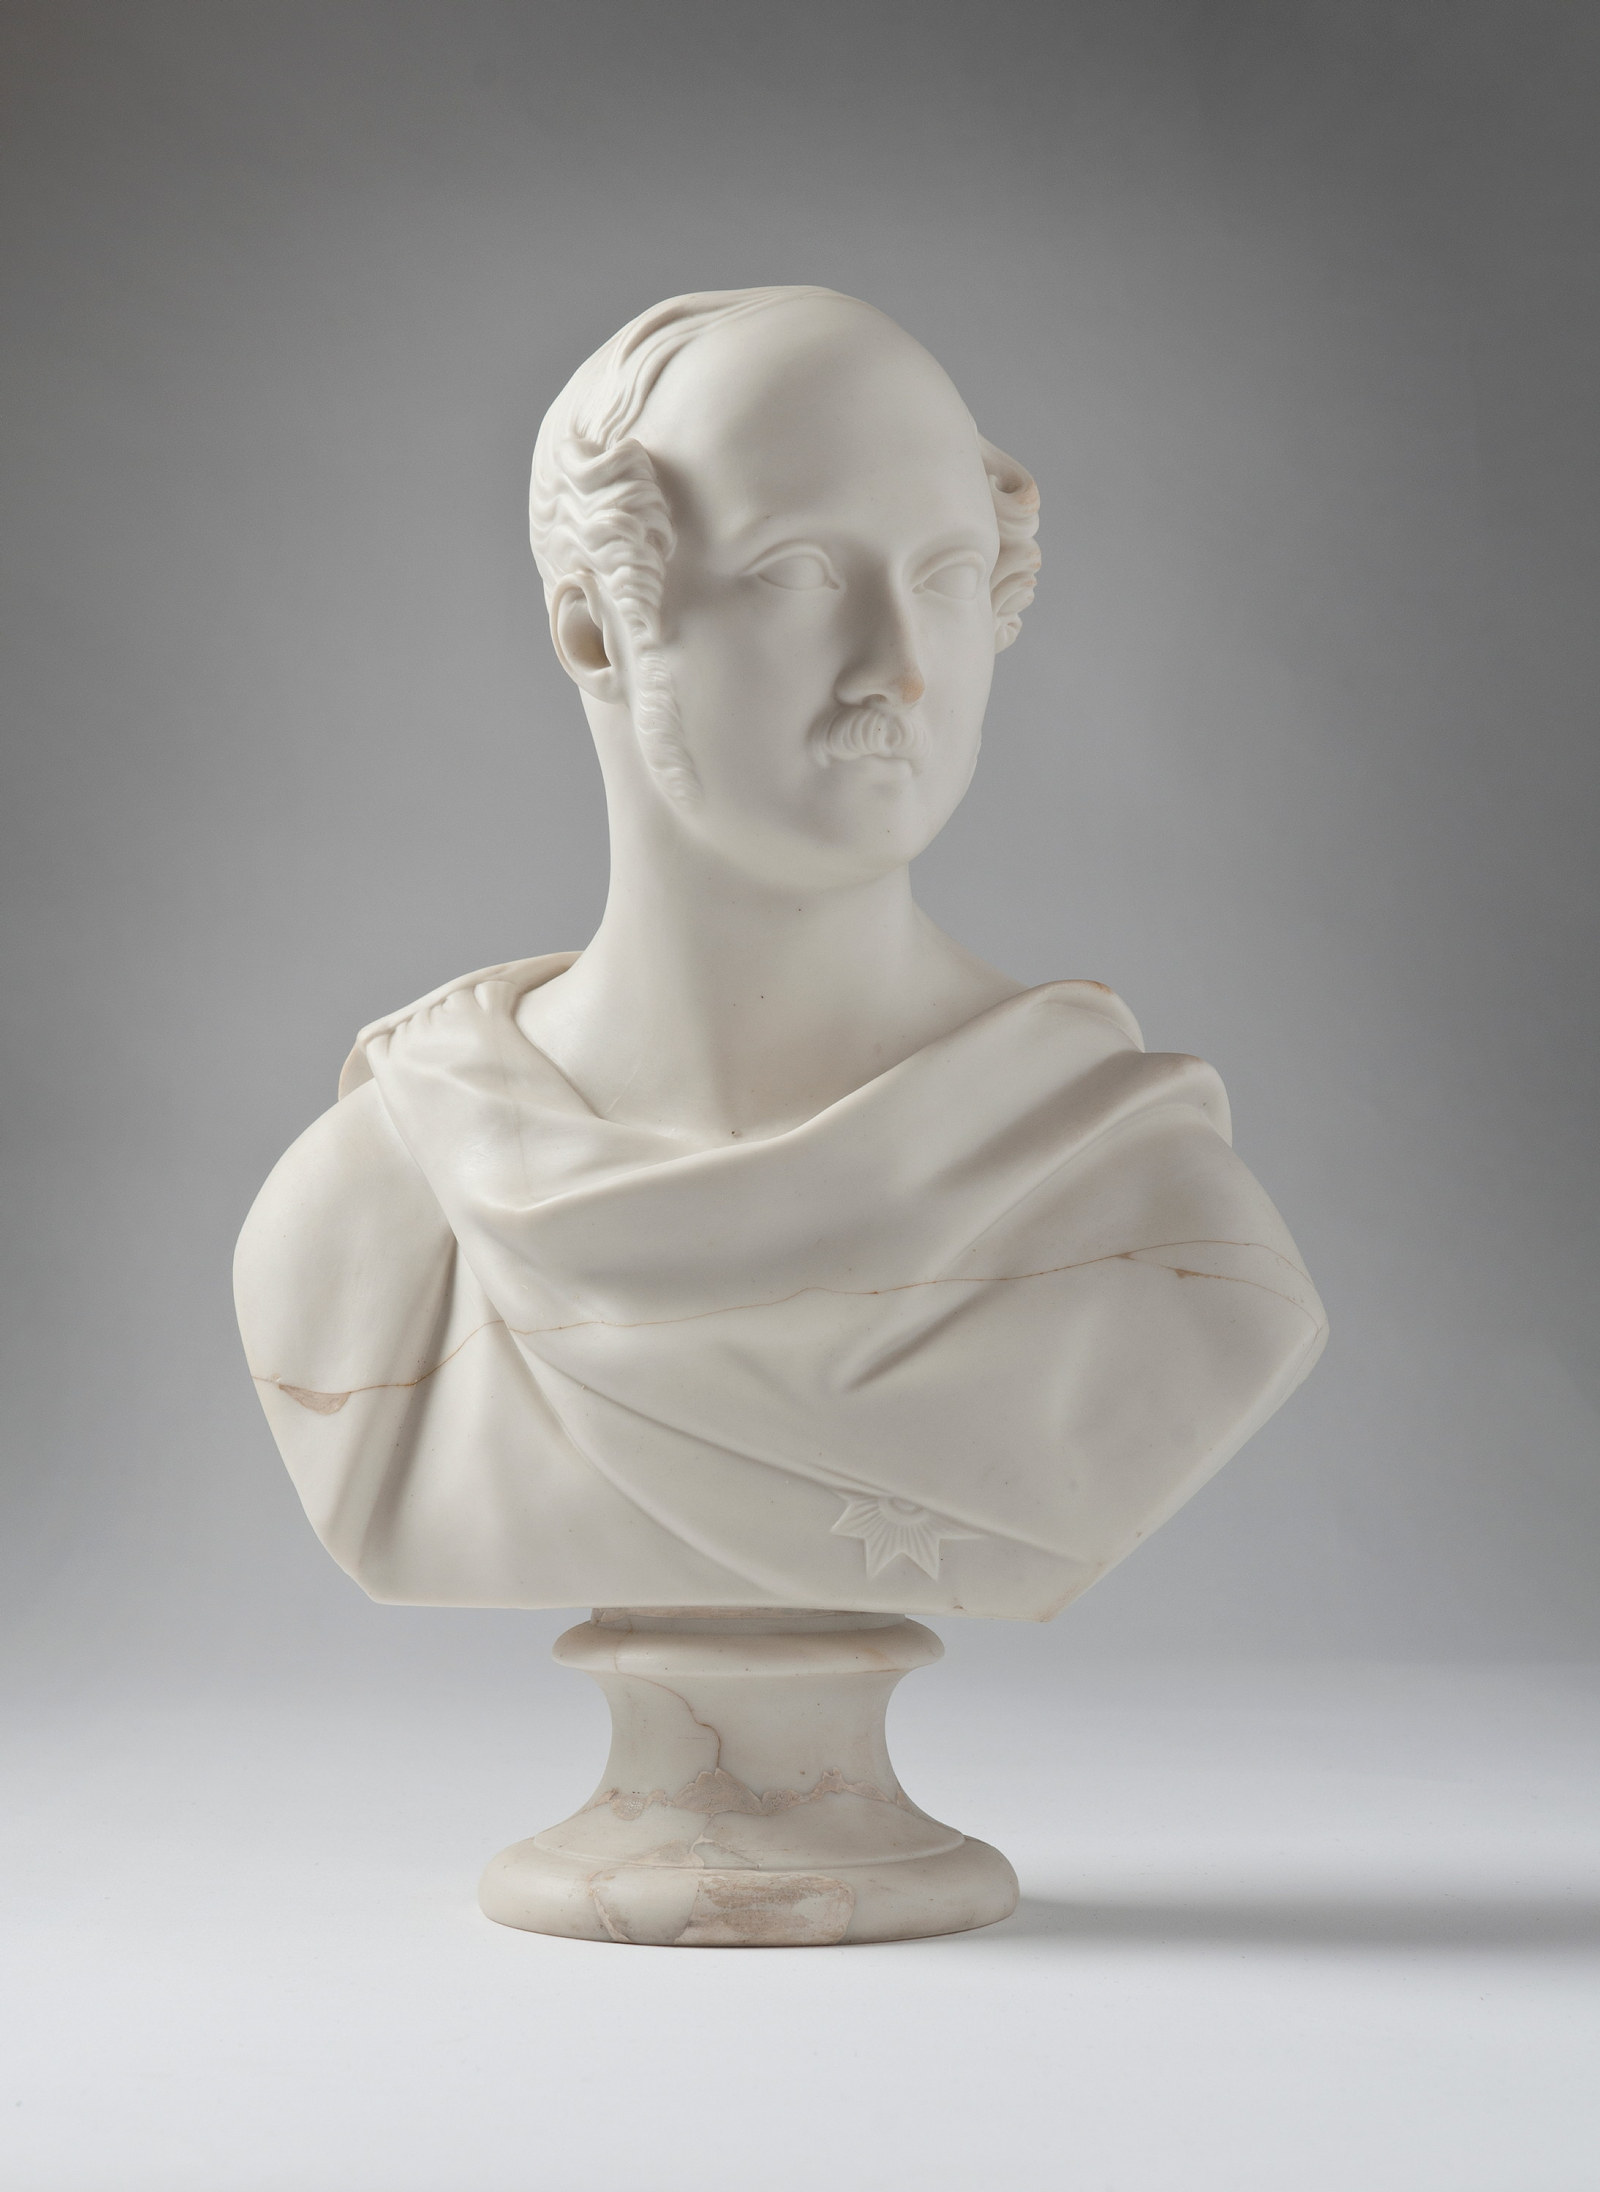 High 3/4 profile bust of man with moustache and sideburns, robed.